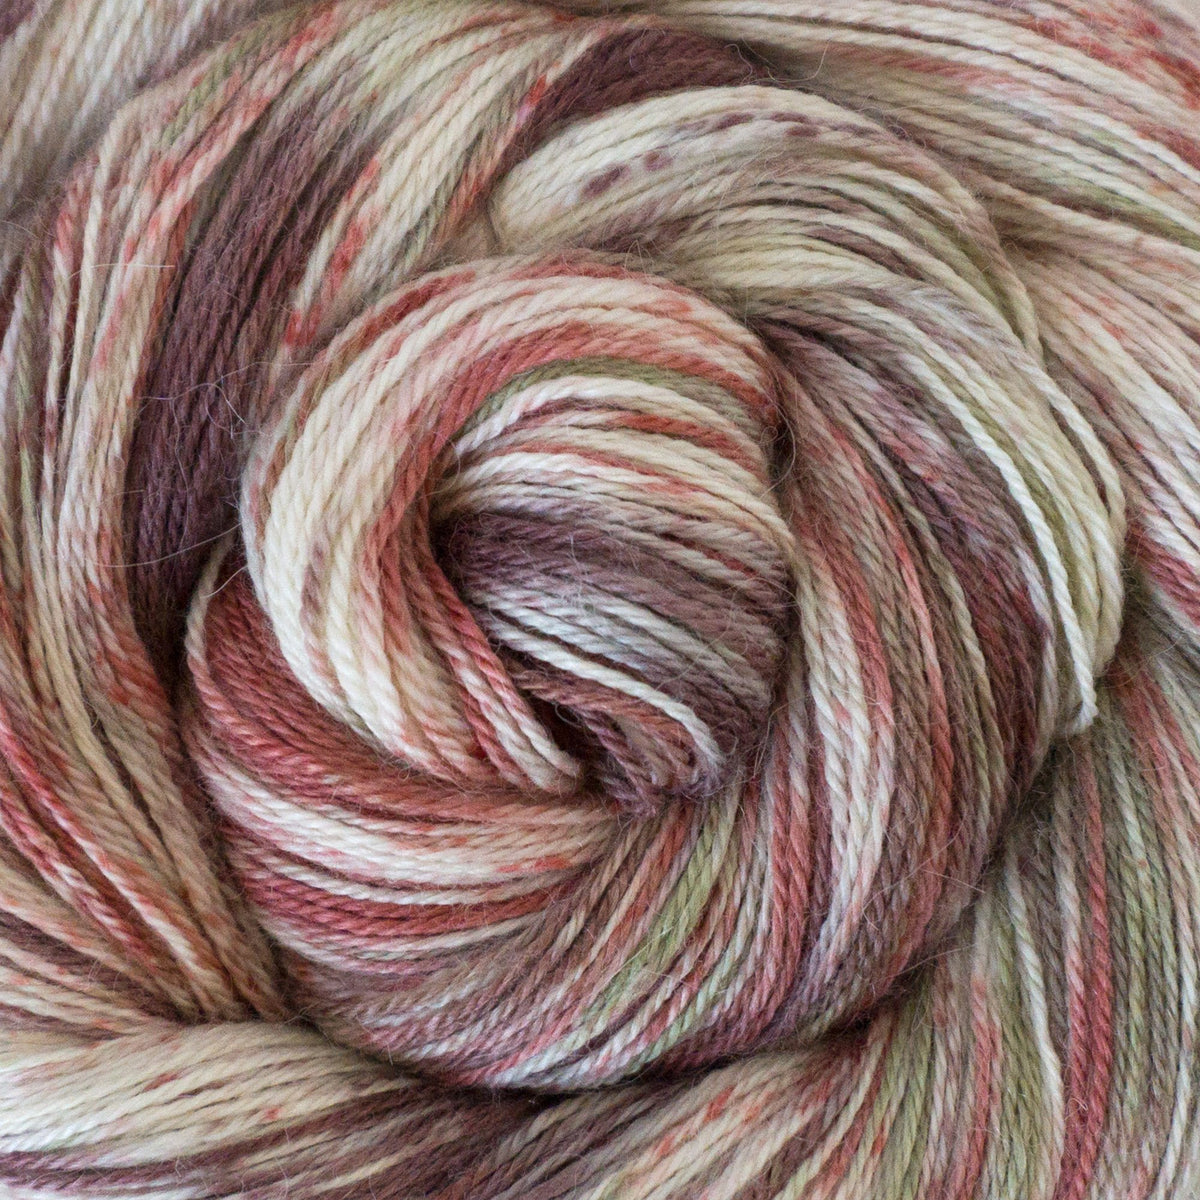 100% Cashmere Yarn for Hand Knitting 3-Ply Fine Worsted Crochet